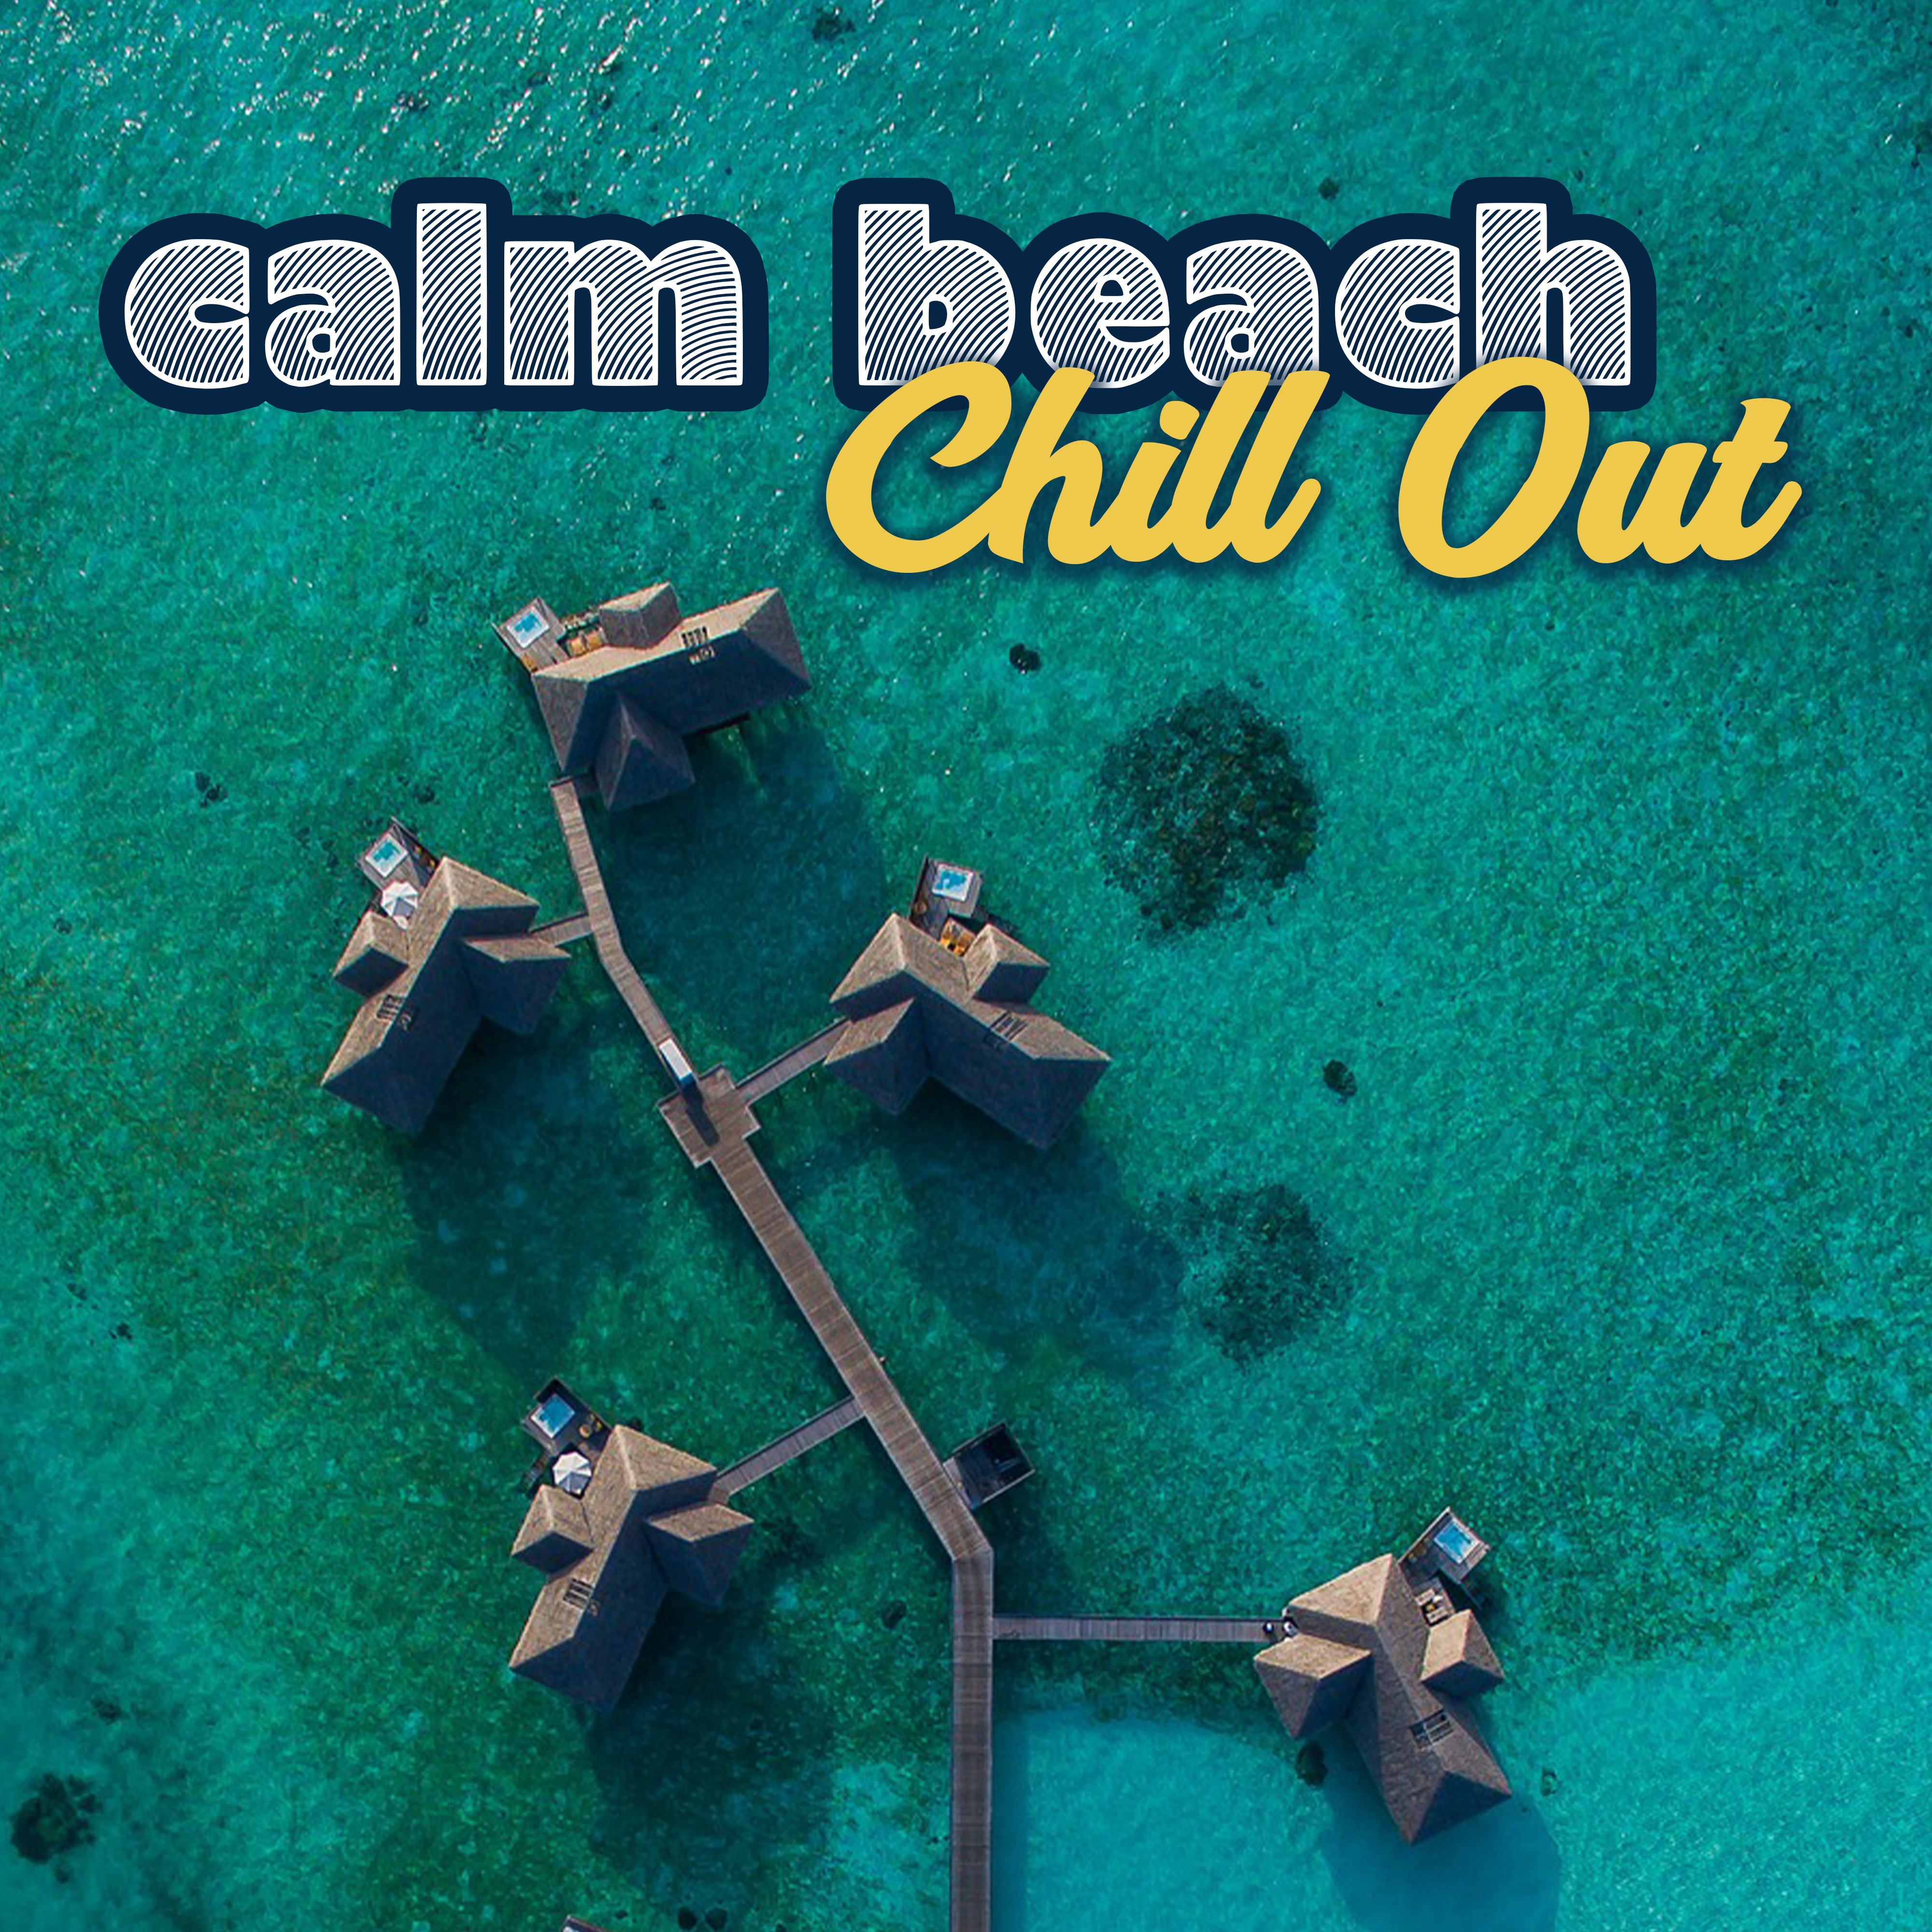 Calm Beach Chill Out – Stress Relief, Soft Sounds, Beach Lounge, Chill Out 2017, Relaxing Vibes